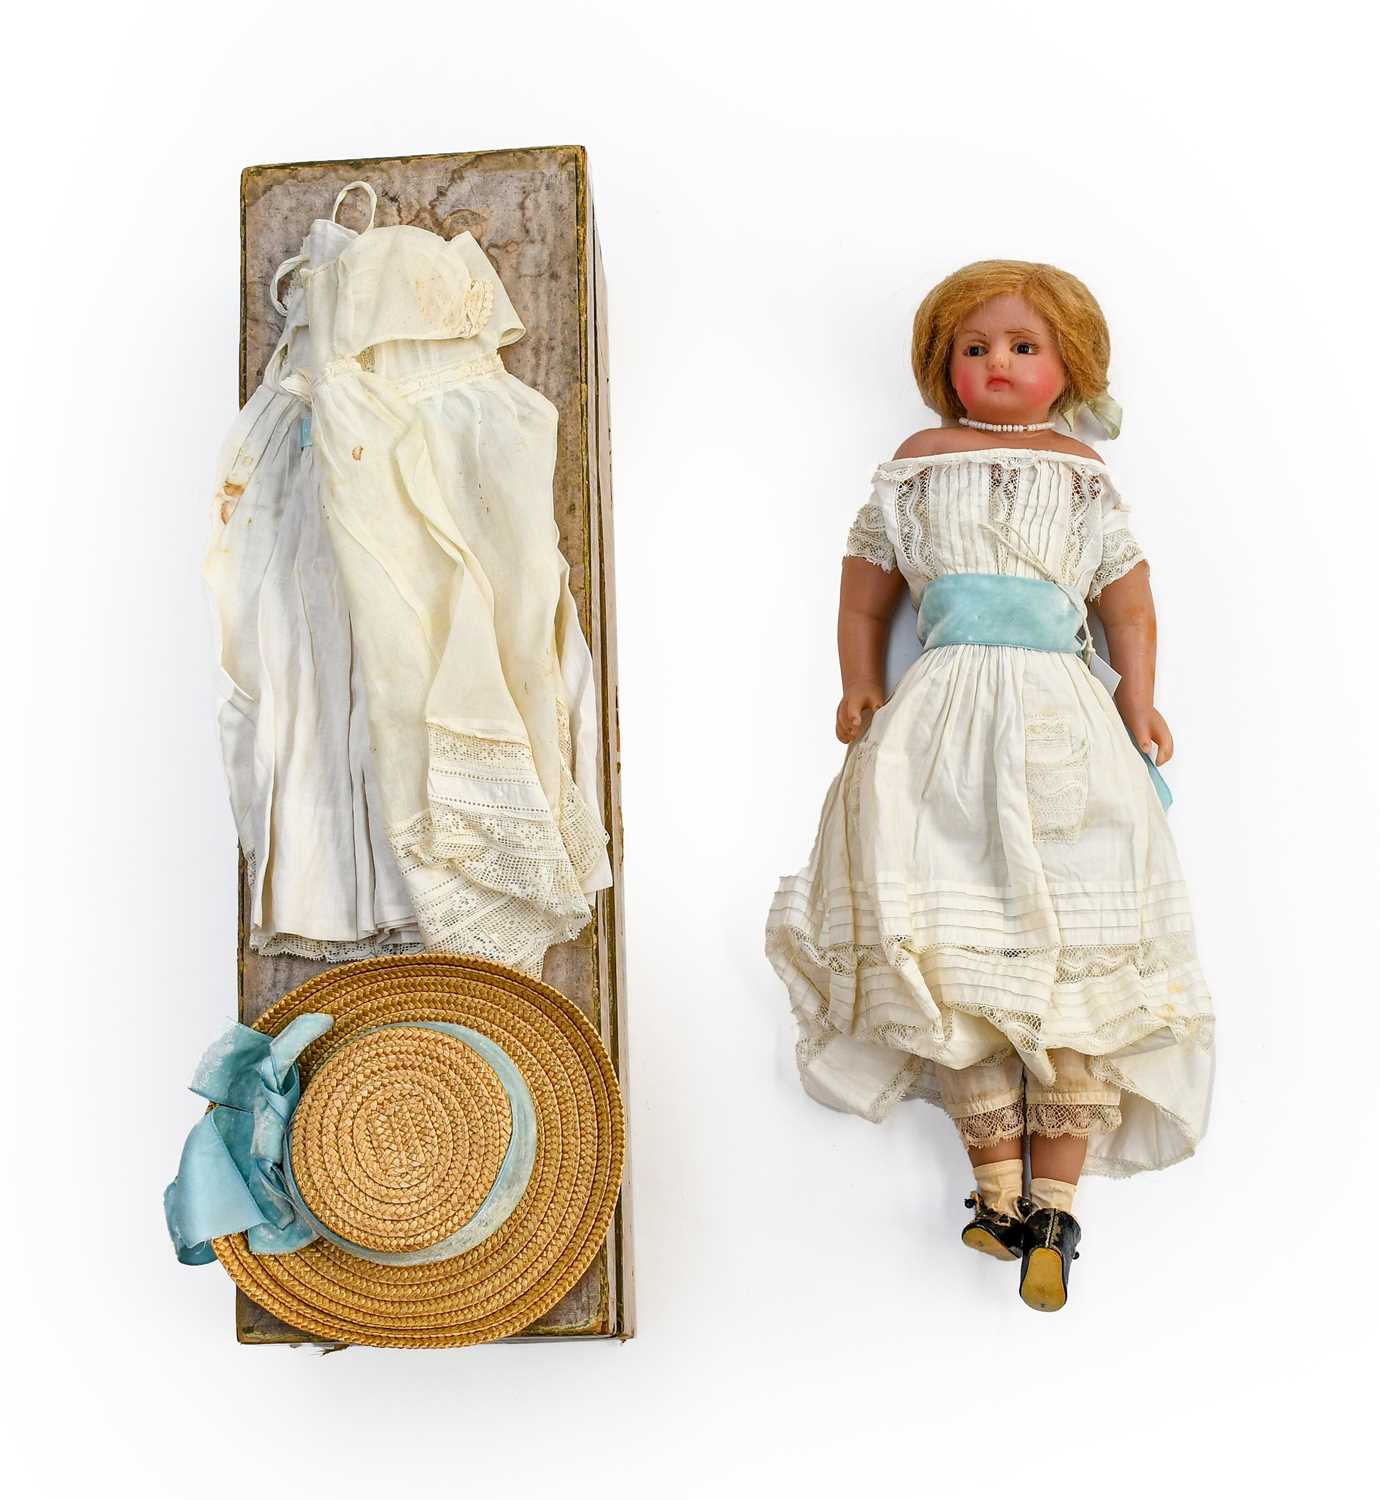 Circa 1850s Wax Shoulder Head Doll of Princess Louise, with glass eyes, blond wig, wax lower arms